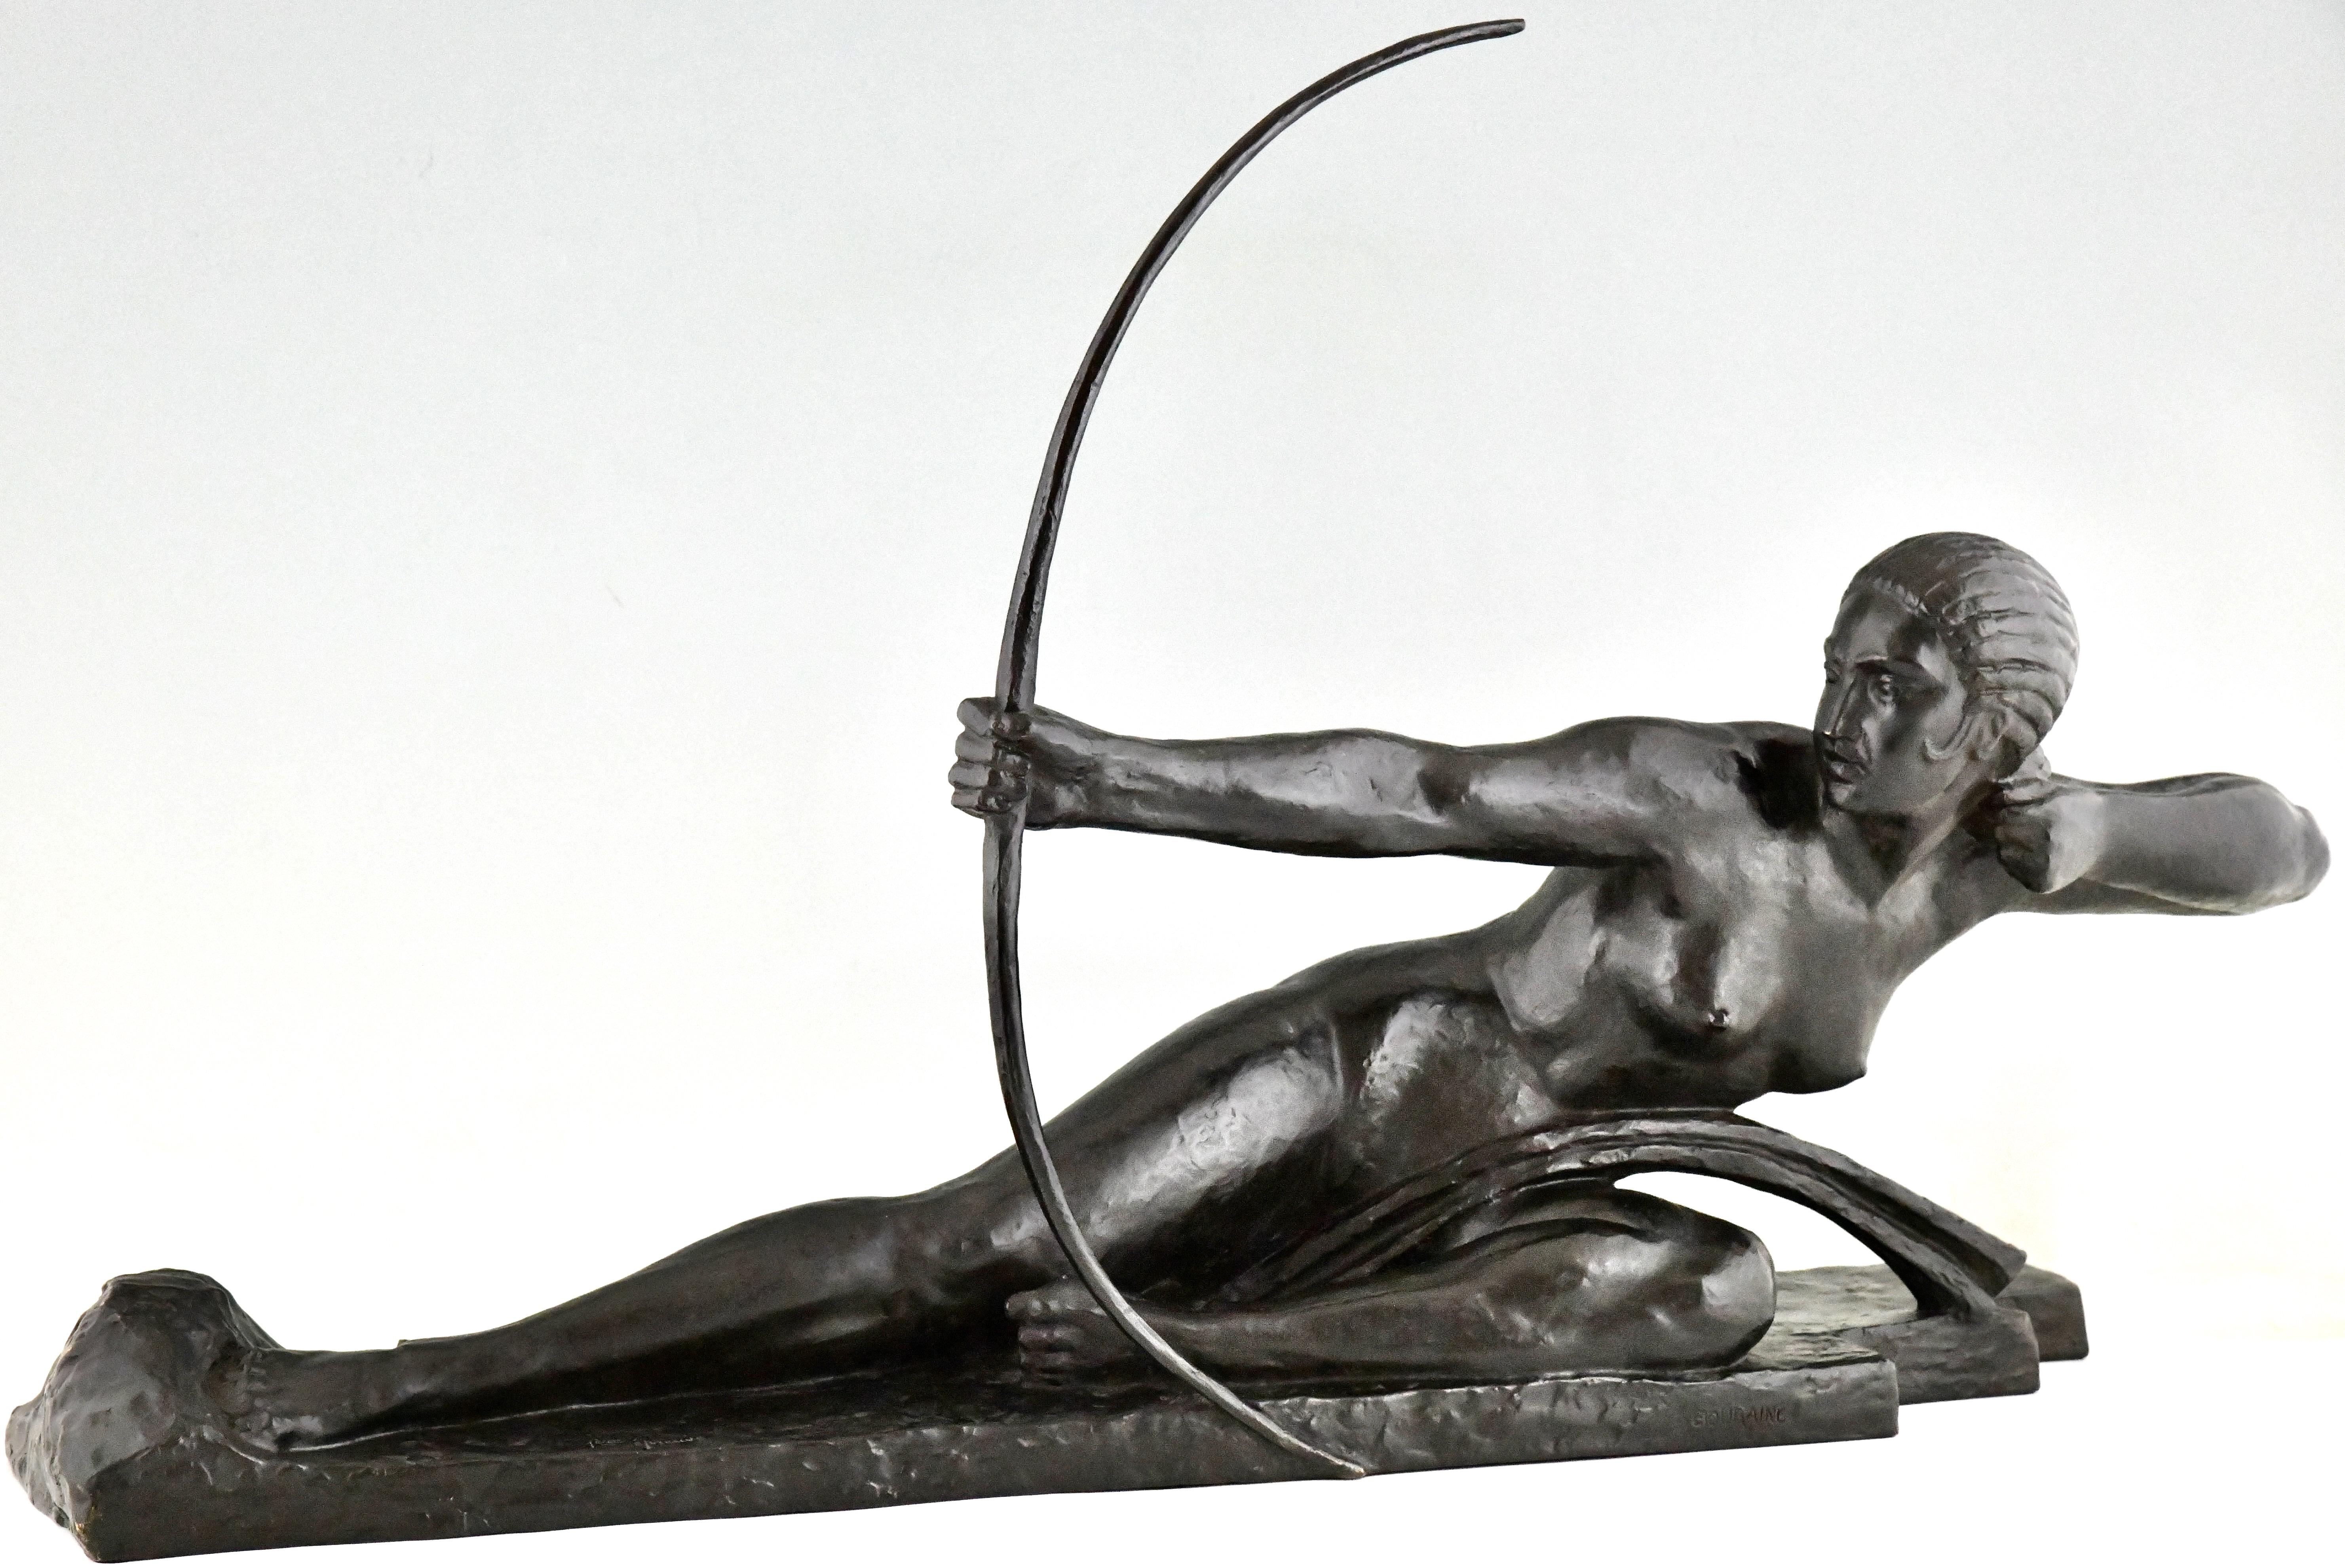 Art Deco bronze sculpture nude with bow, Penthesilia, Queen of the Amazons by Marcel André Bouraine with Susse Frères editeurs Paris seal.
Cire perdue. Bronze with black patina. France 1925. 
Impressive size! 
This bronze is illustrated in the